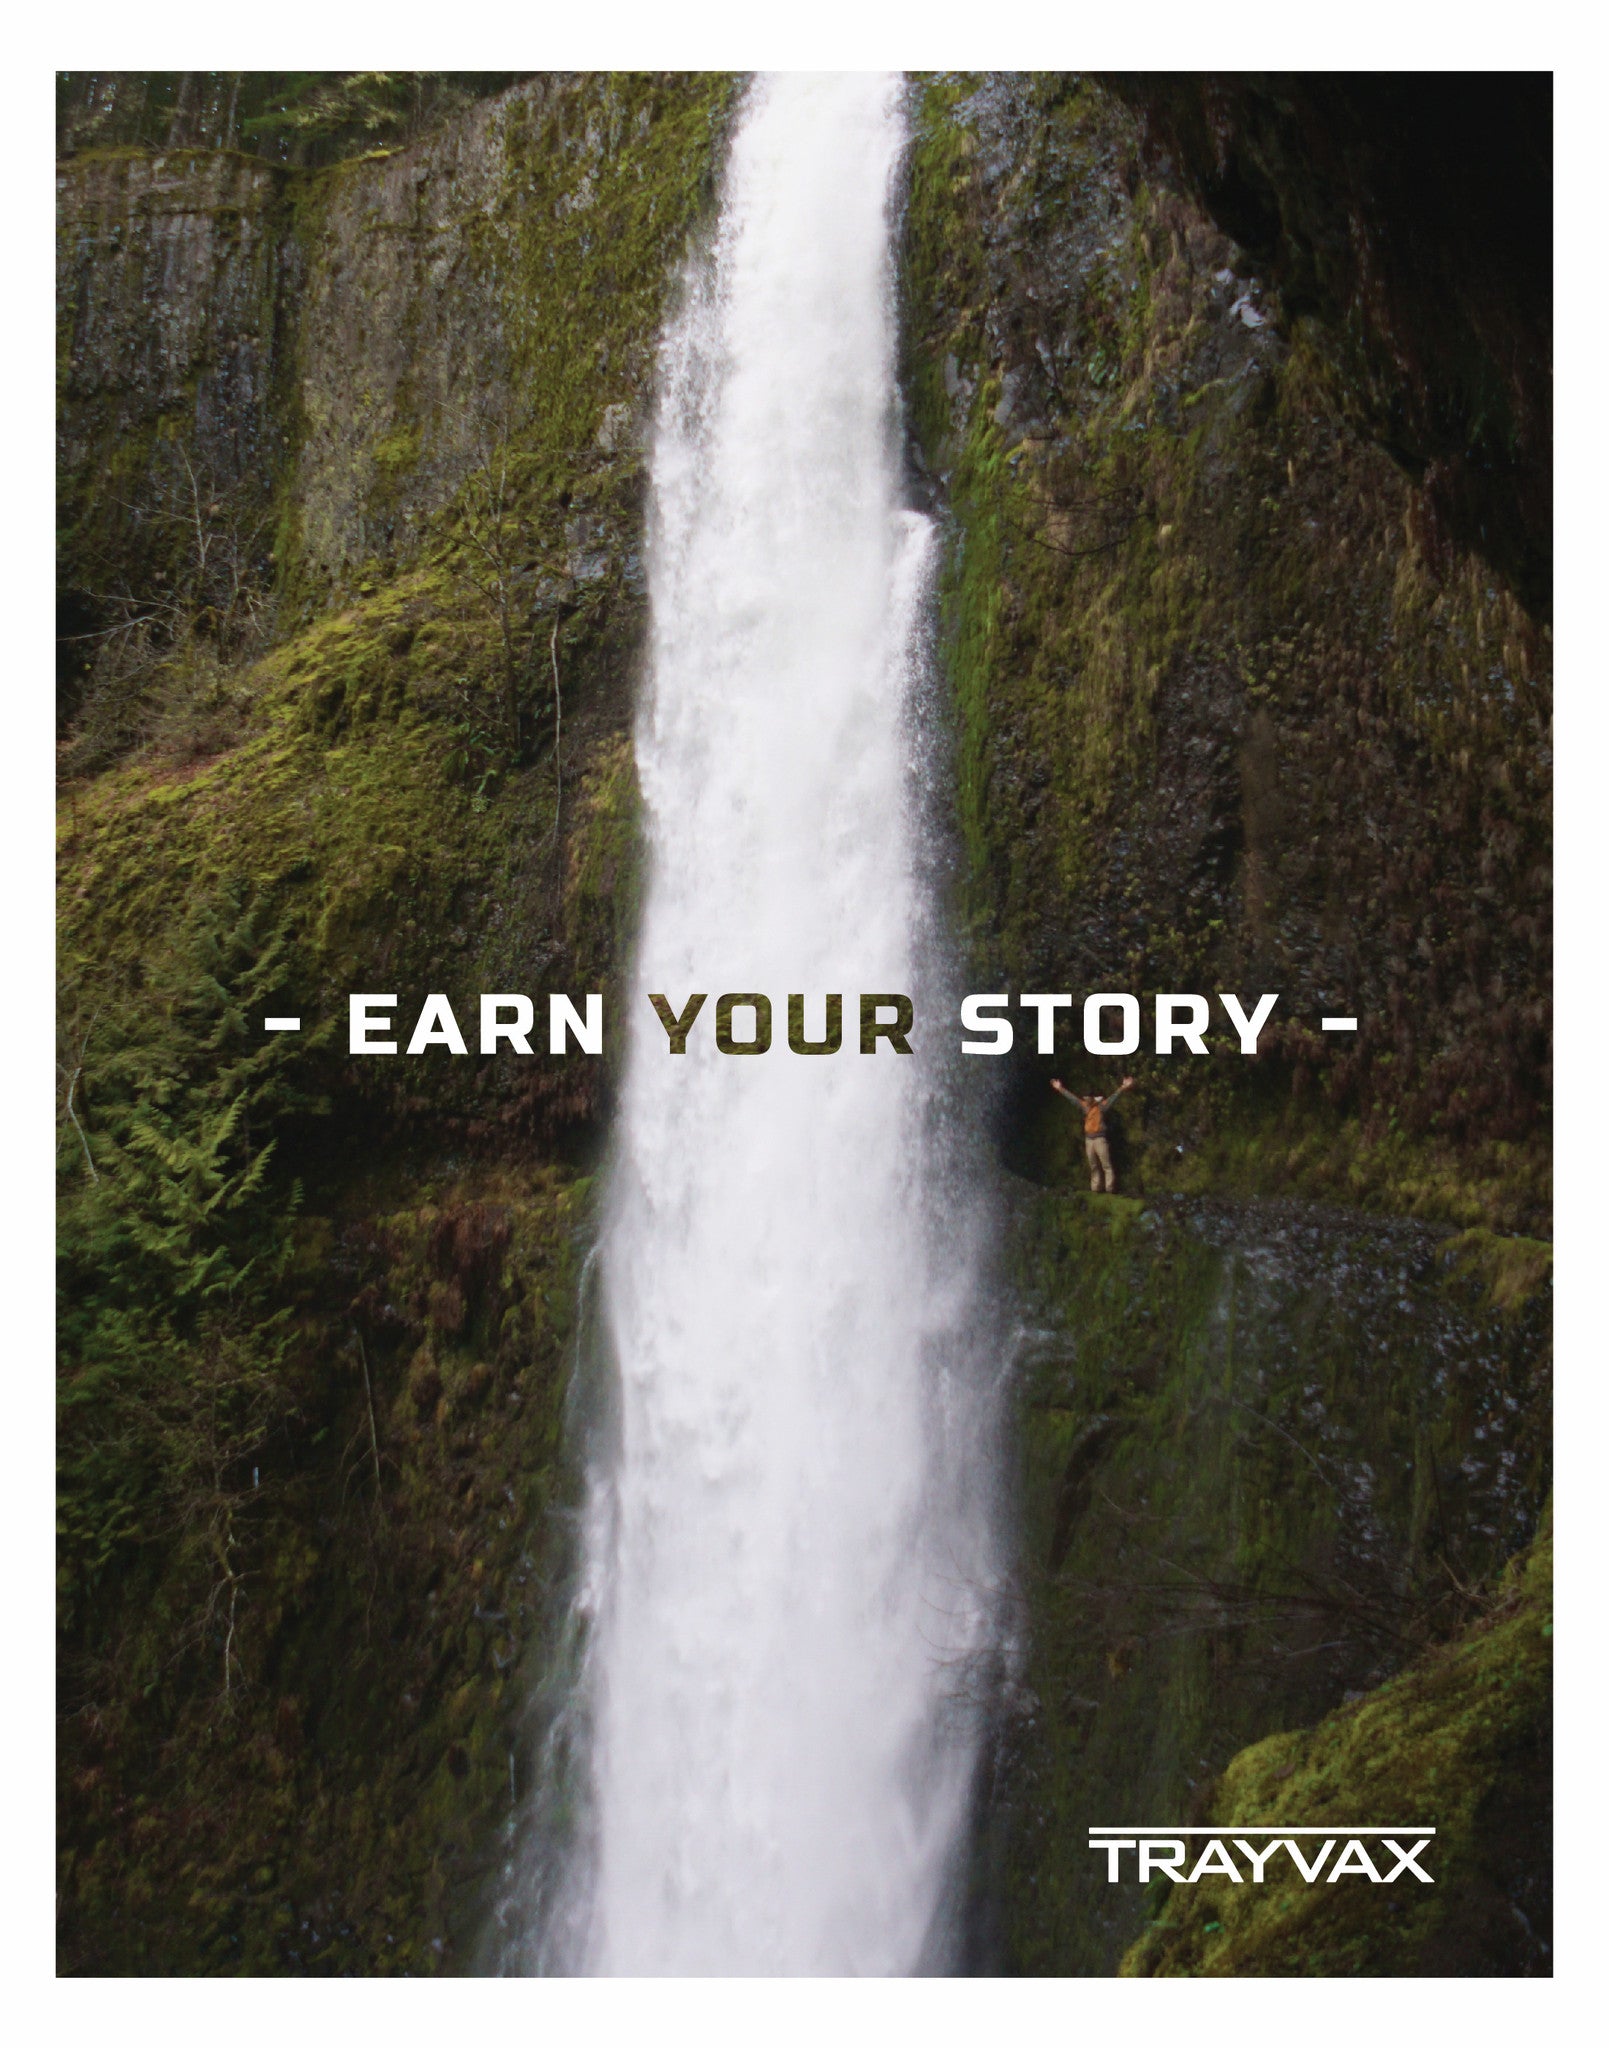 What it Means to Earn Your Story